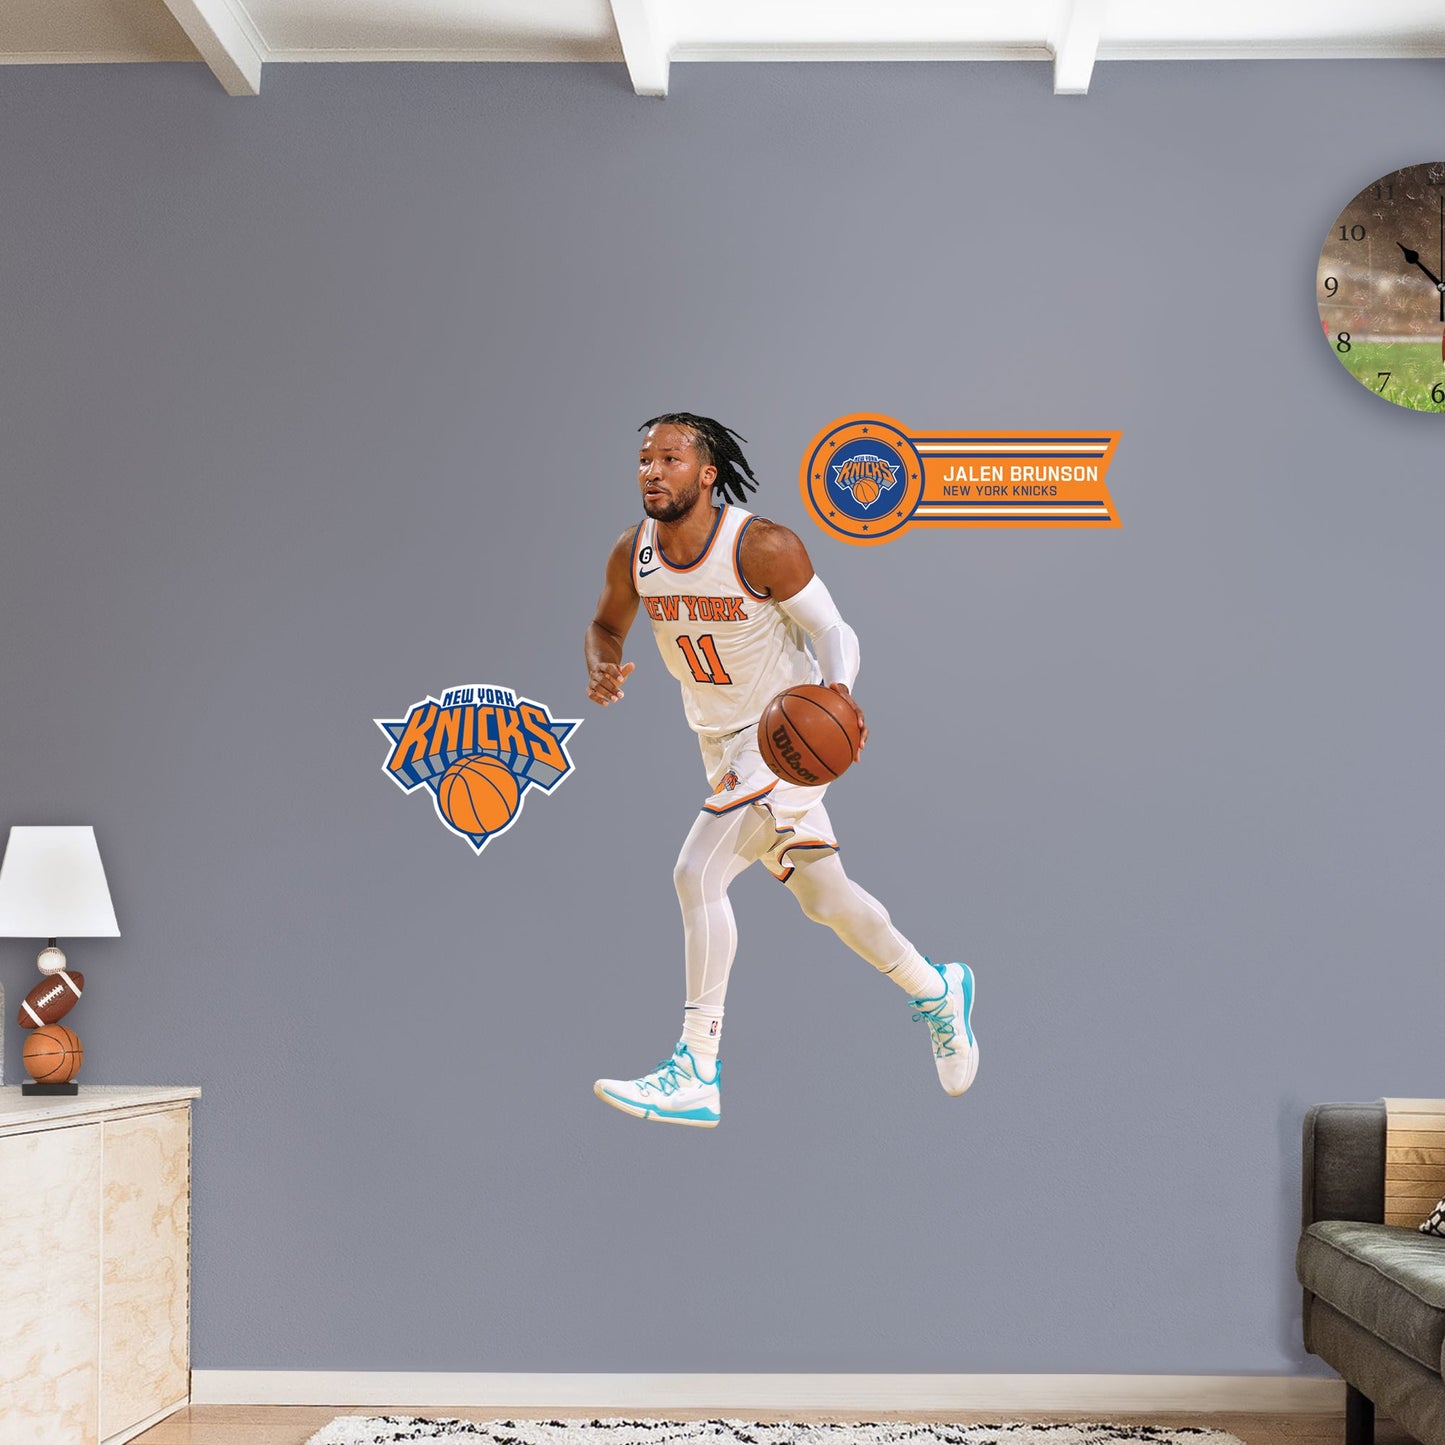 New York Knicks: Jalen Brunson - Officially Licensed NBA Removable Adhesive Decal